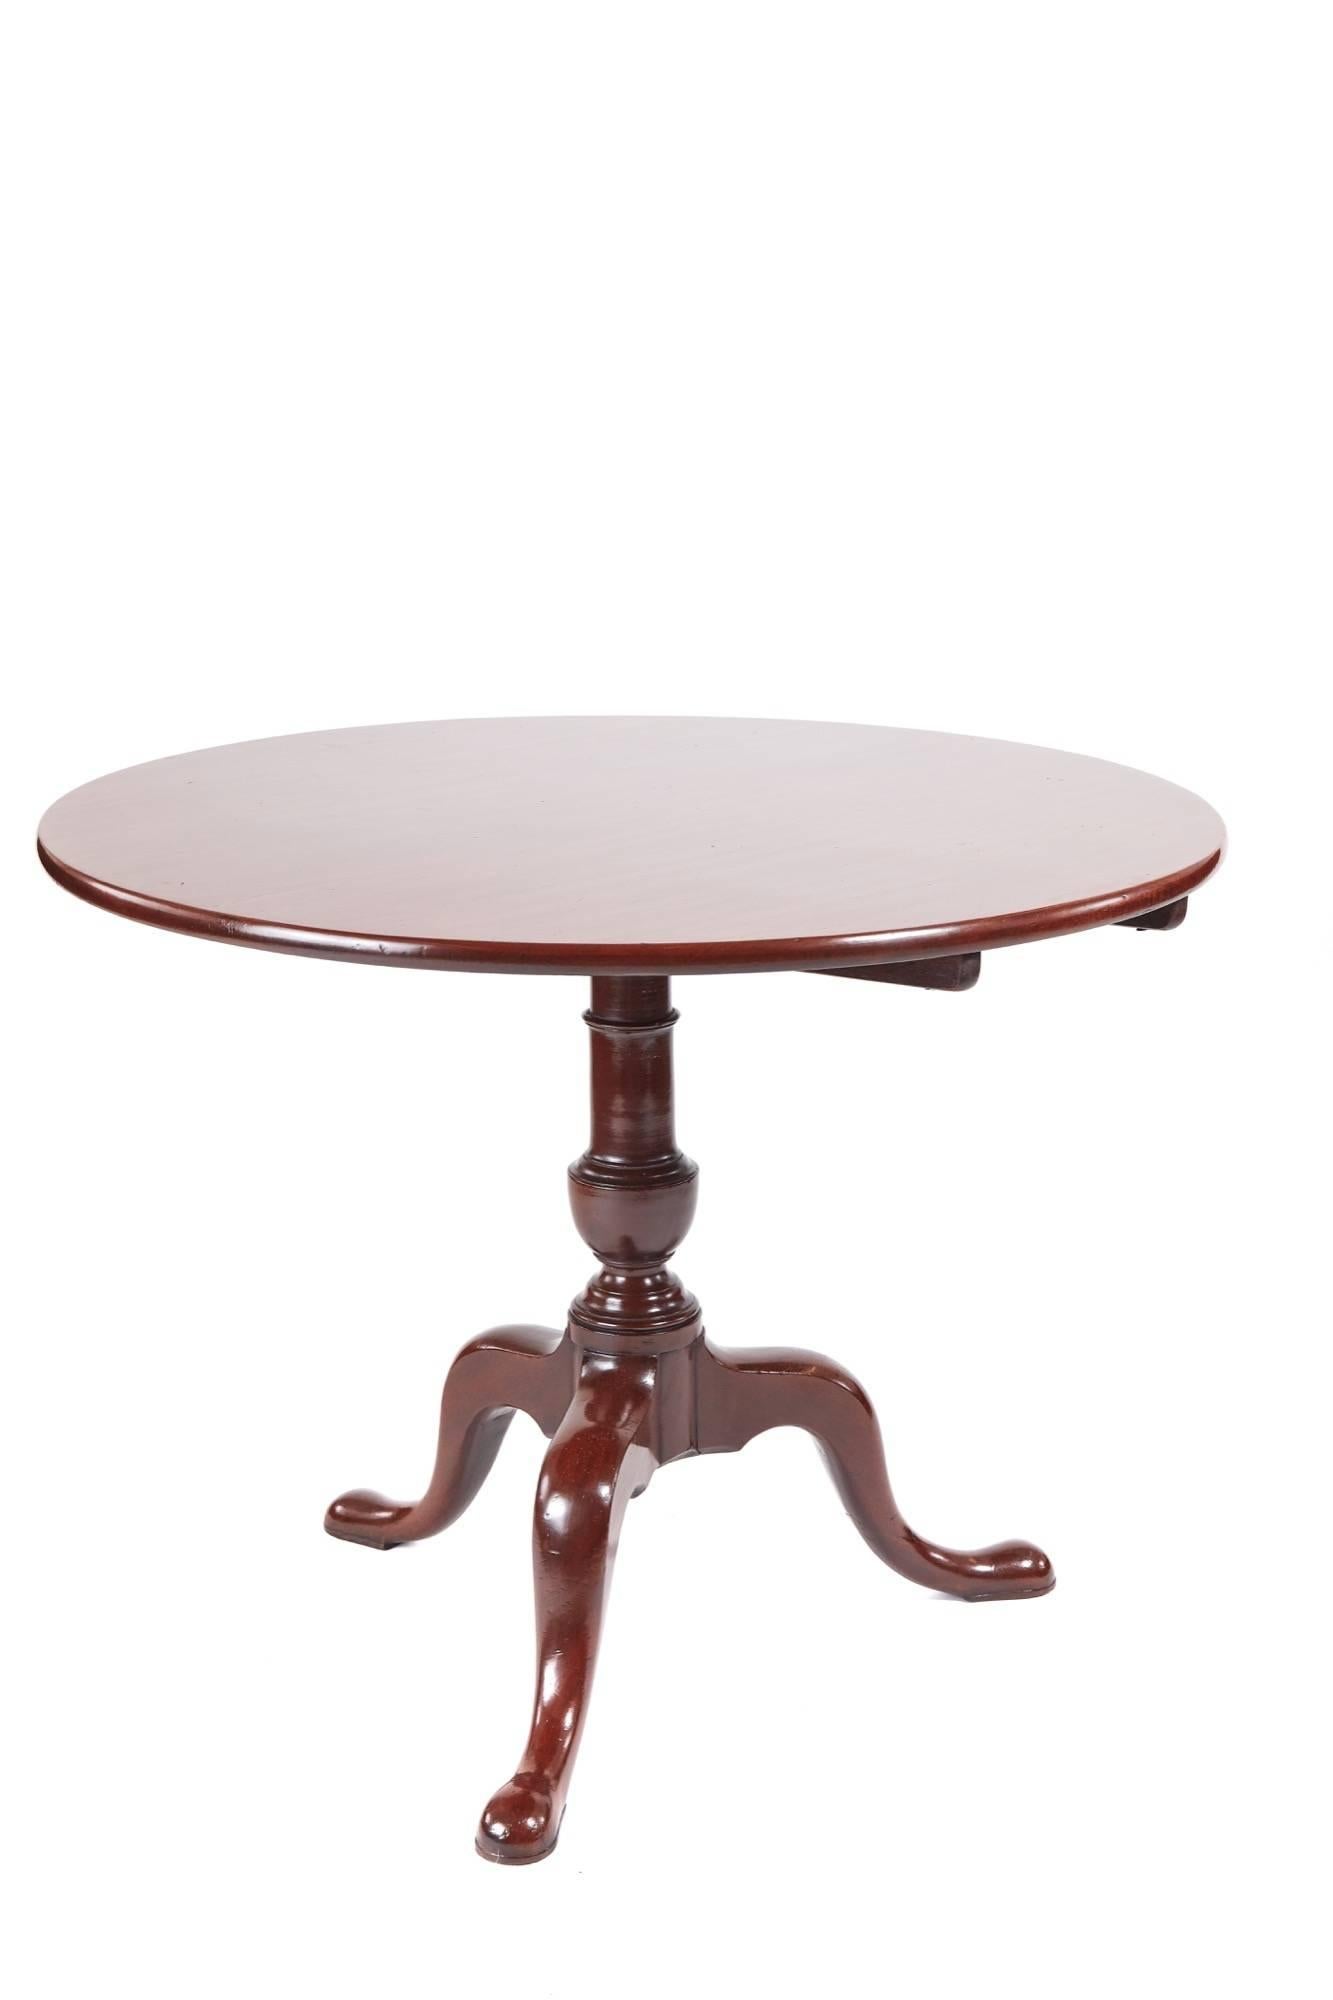 Large George III mahogany tripod table, with a fantastic solid mahogany round top supported by a lovely turned shaped pedestal raised on three shaped cabriole legs with pad feet
Fantastic color and condition
Measures: 36